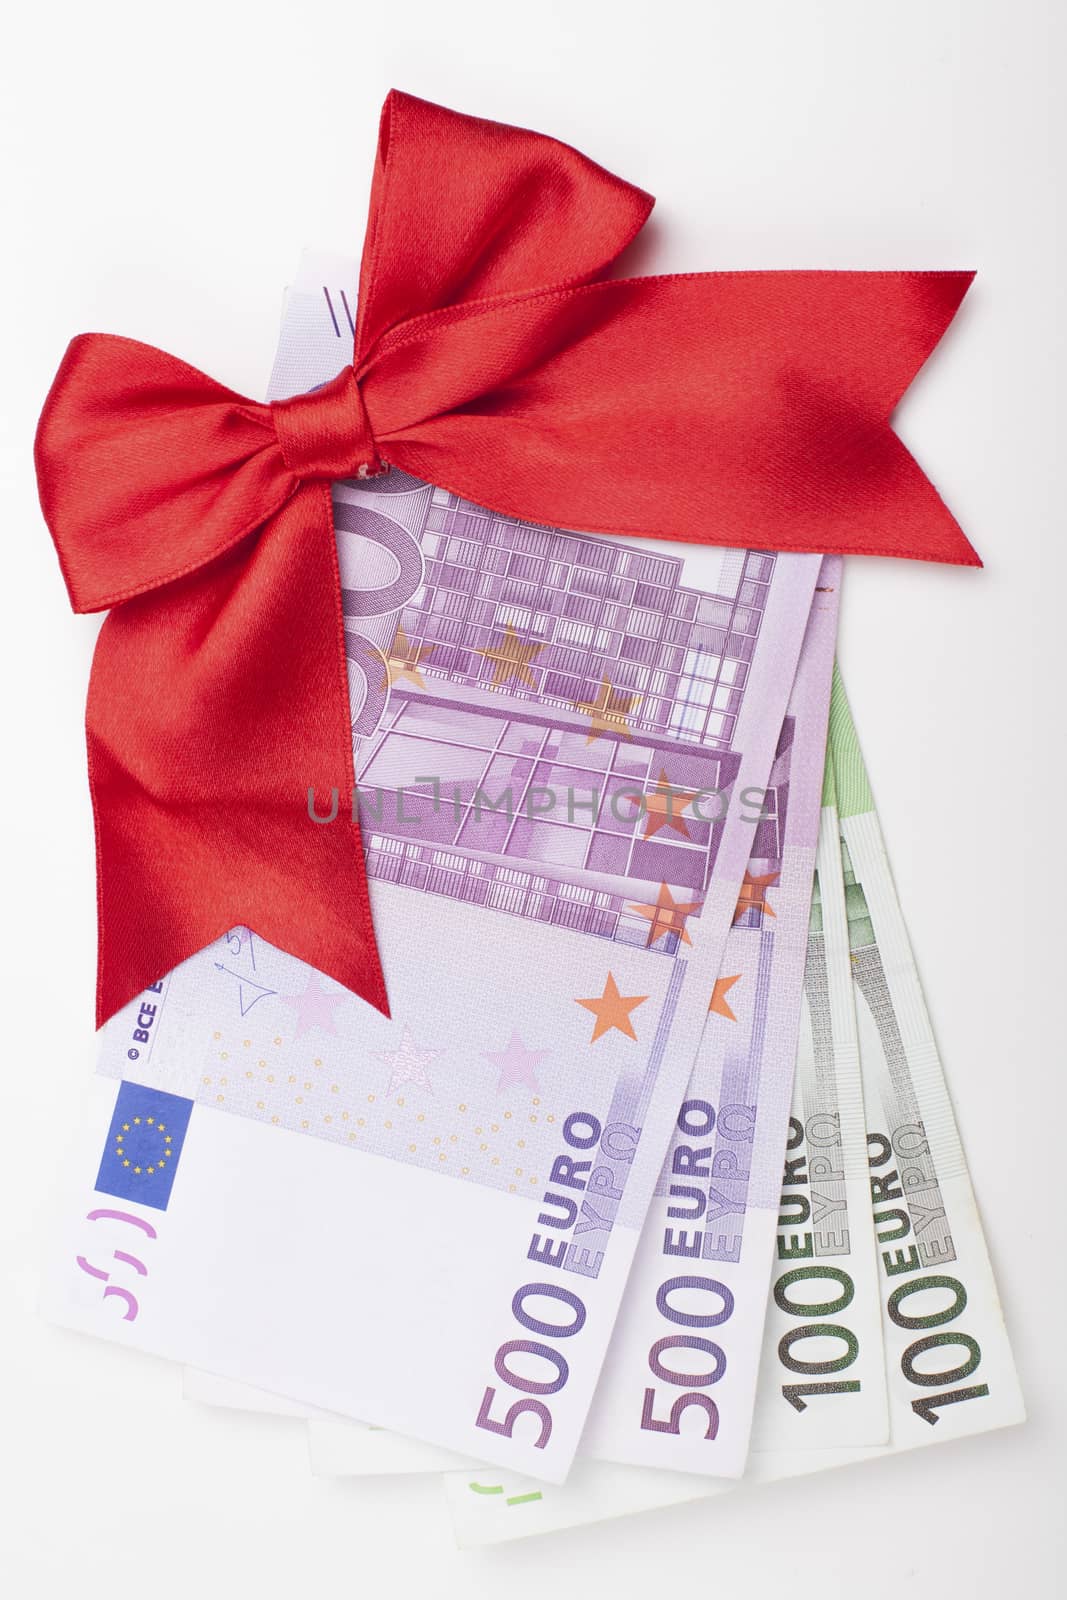 Euro Gift by orcearo